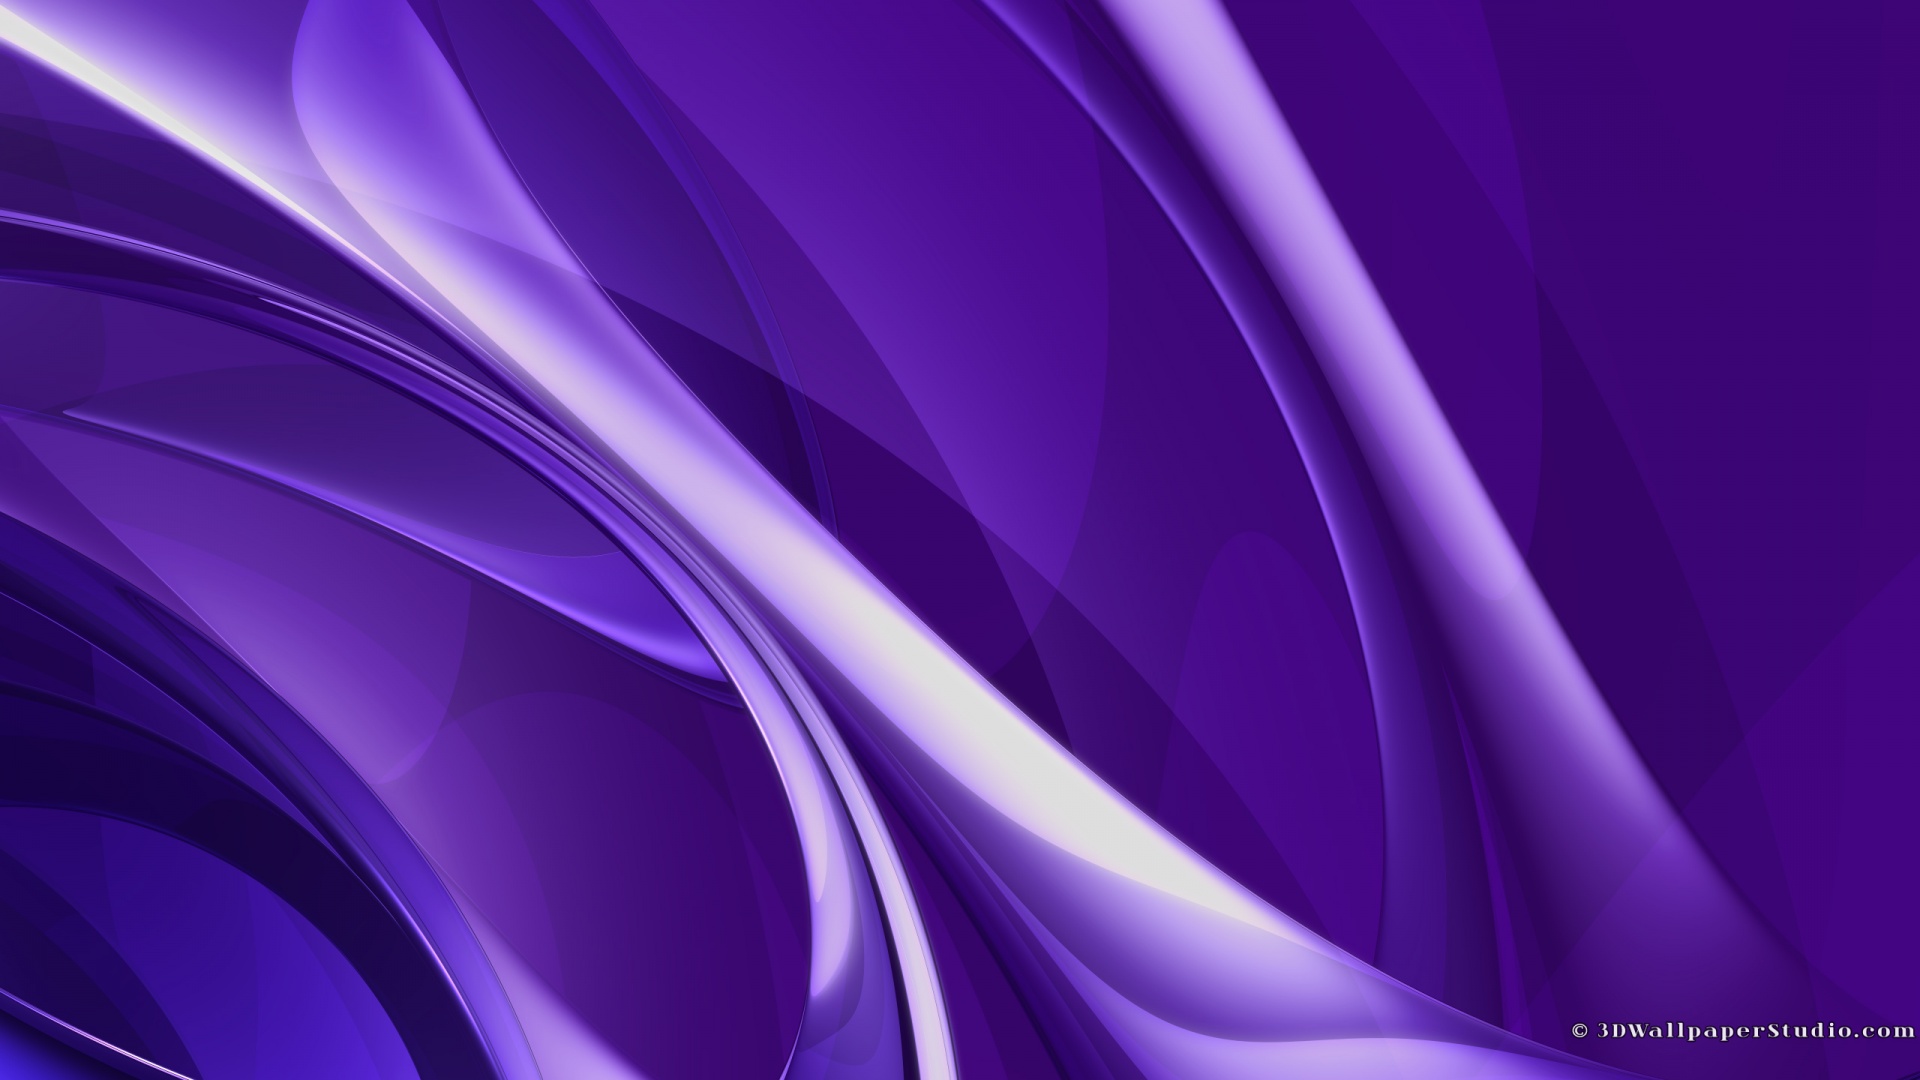 Gallery For Gt Abstract Background Purple